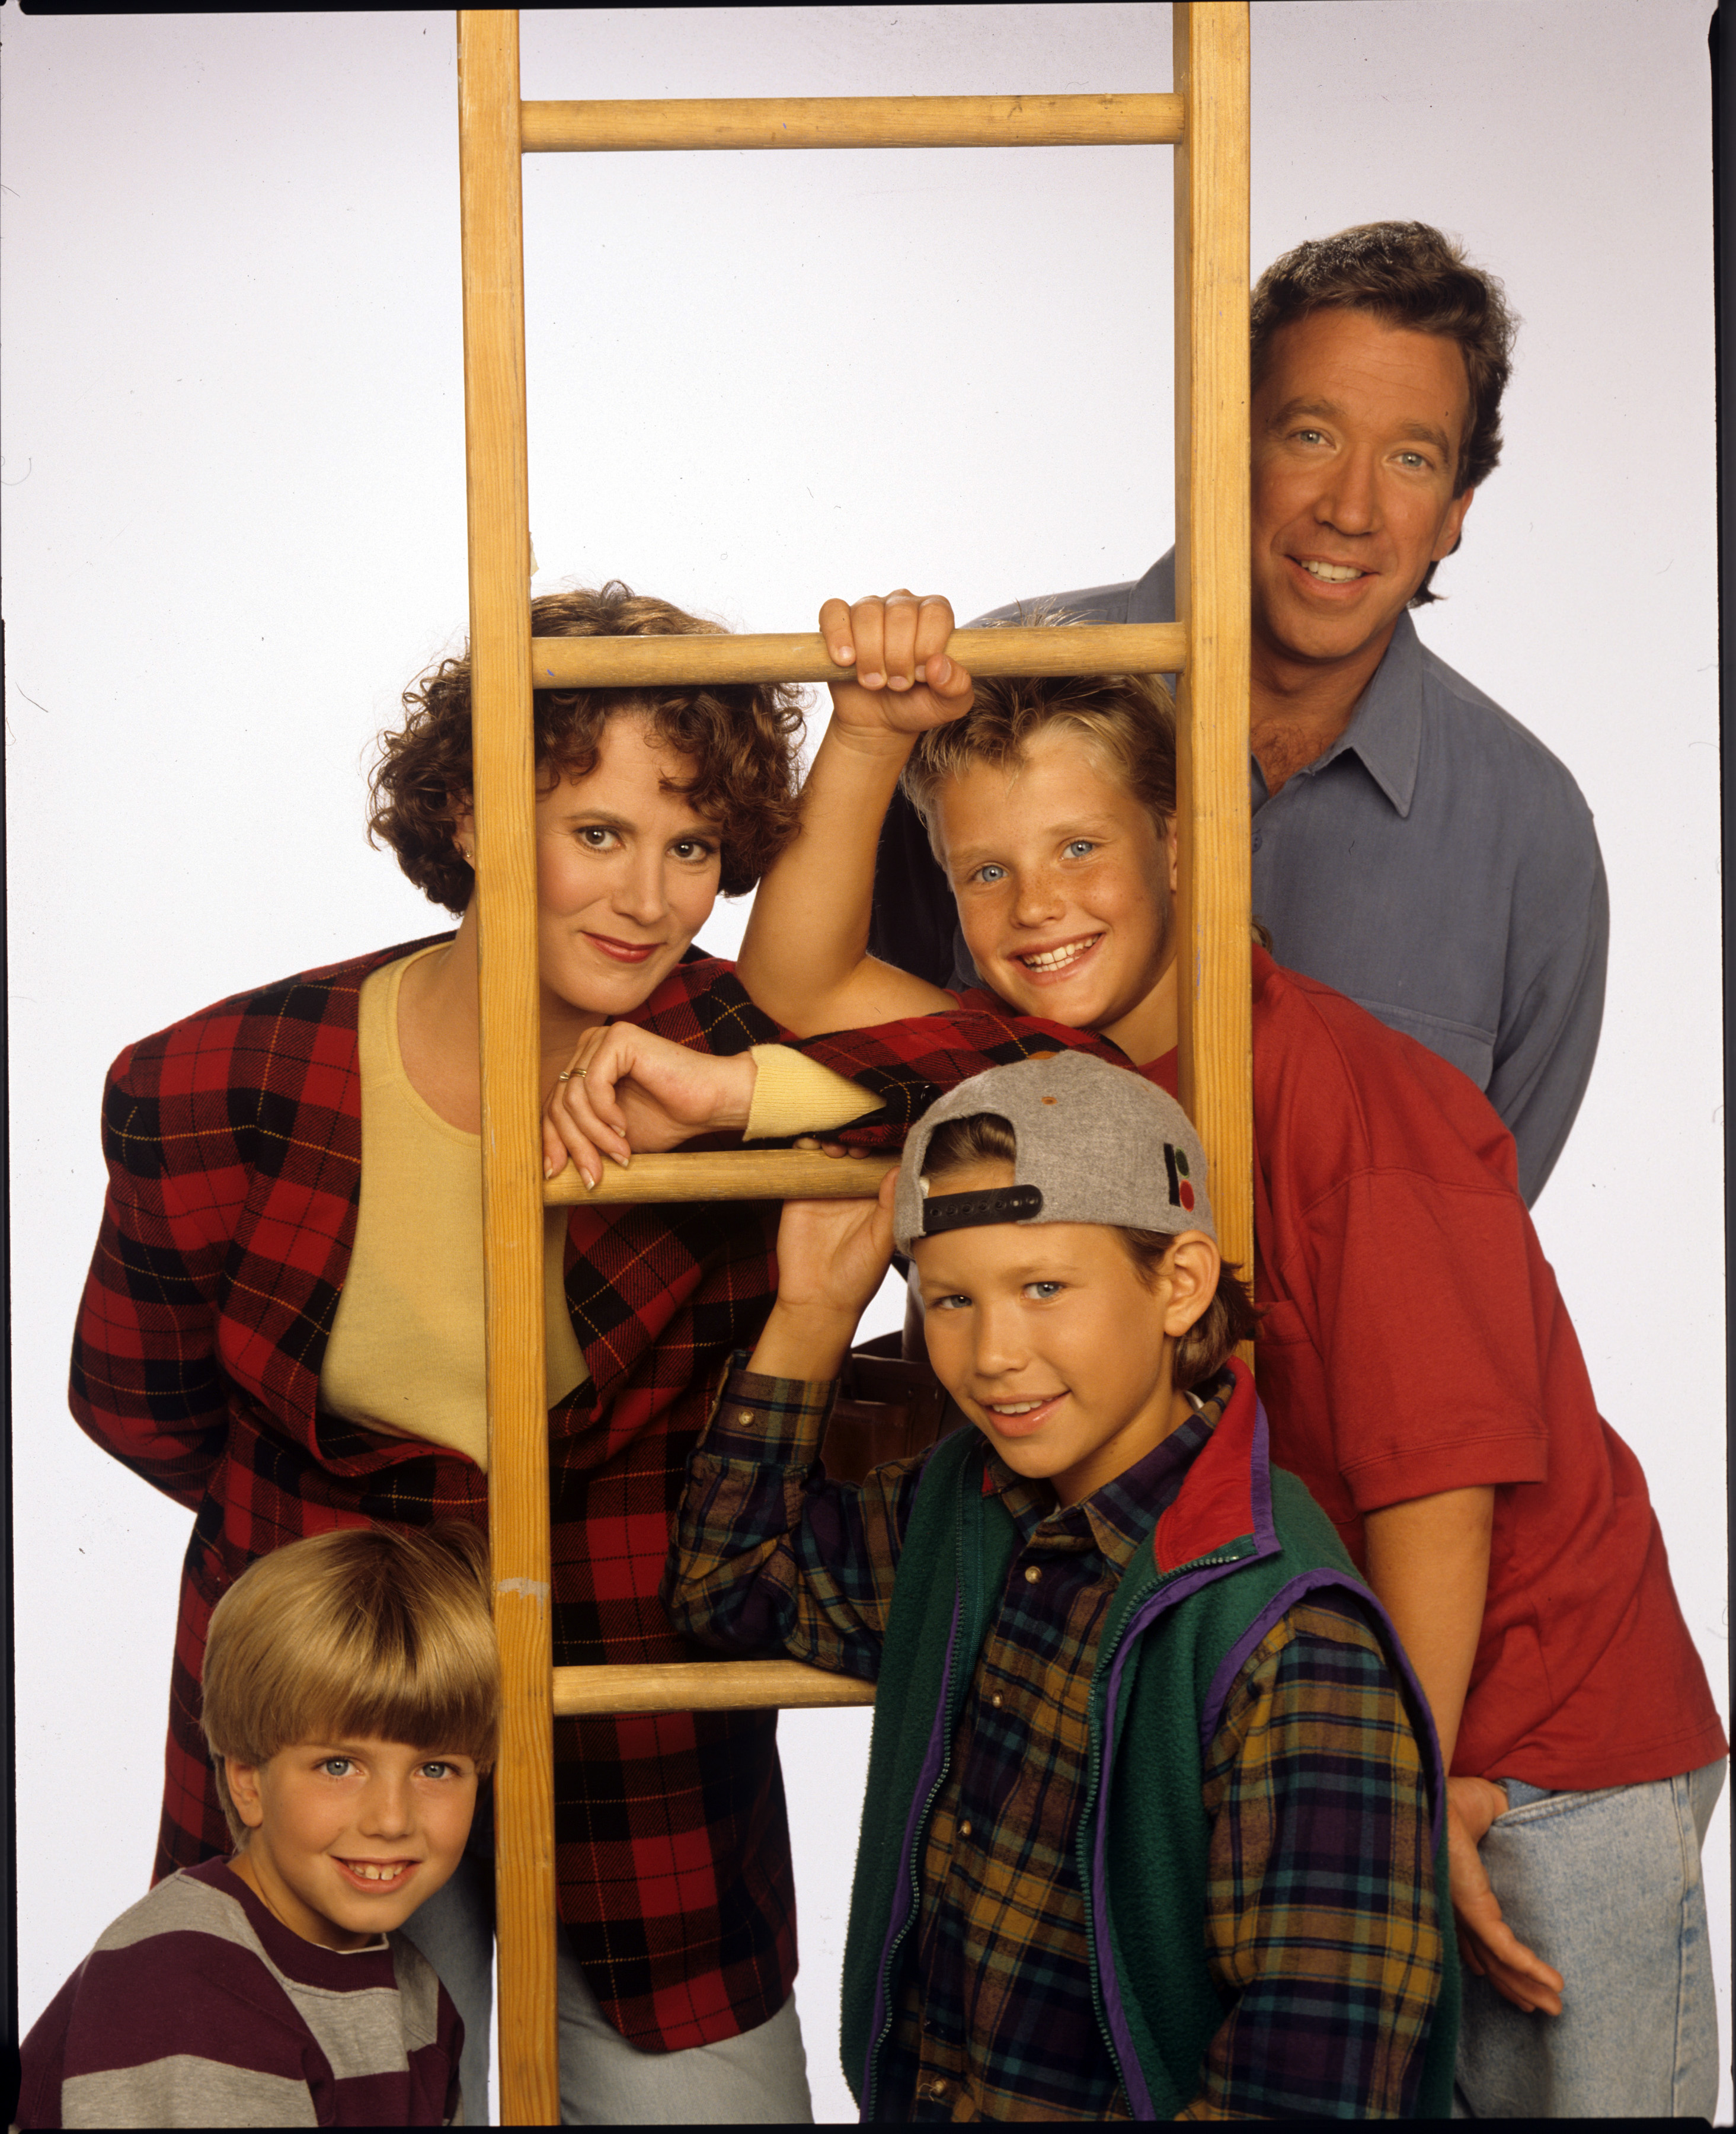 Patricia Richardson and Tim Allen with Taran Noah Smith, Jonathan Taylor Thomas, and Zachery Ty Bryan from "Home Improvement." | Source: Getty Images